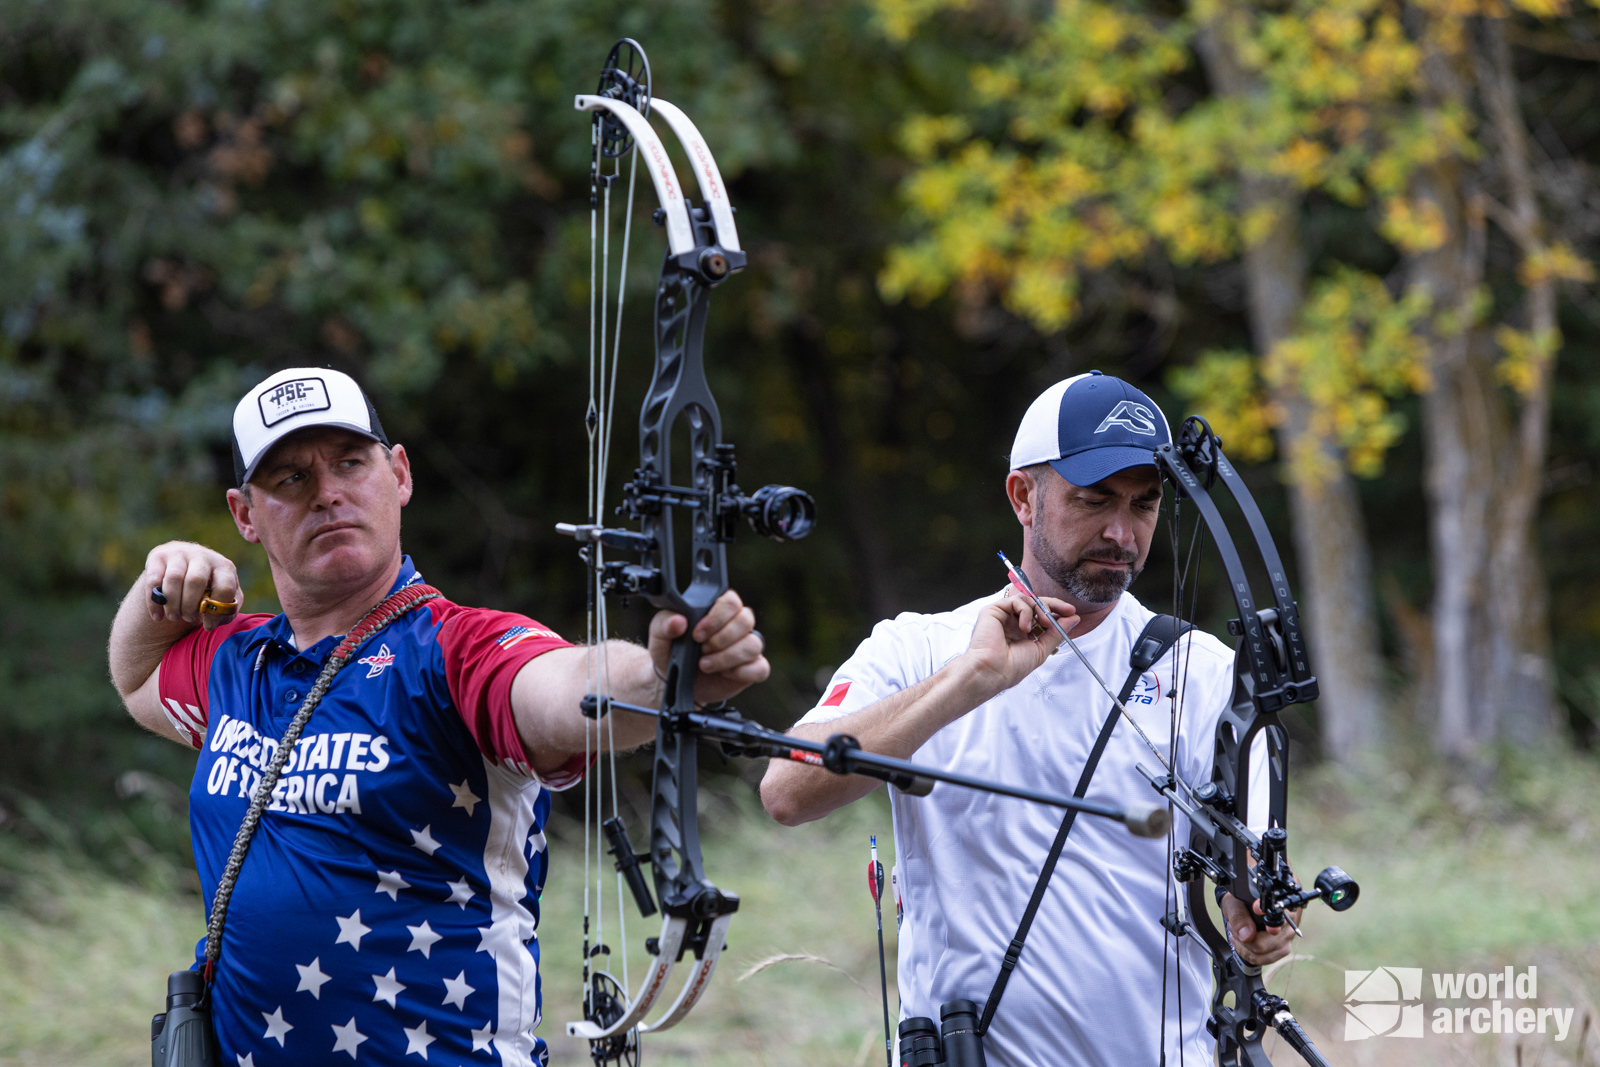 Four U.S. Archers Top Qualifications at 2022 World Archery Field